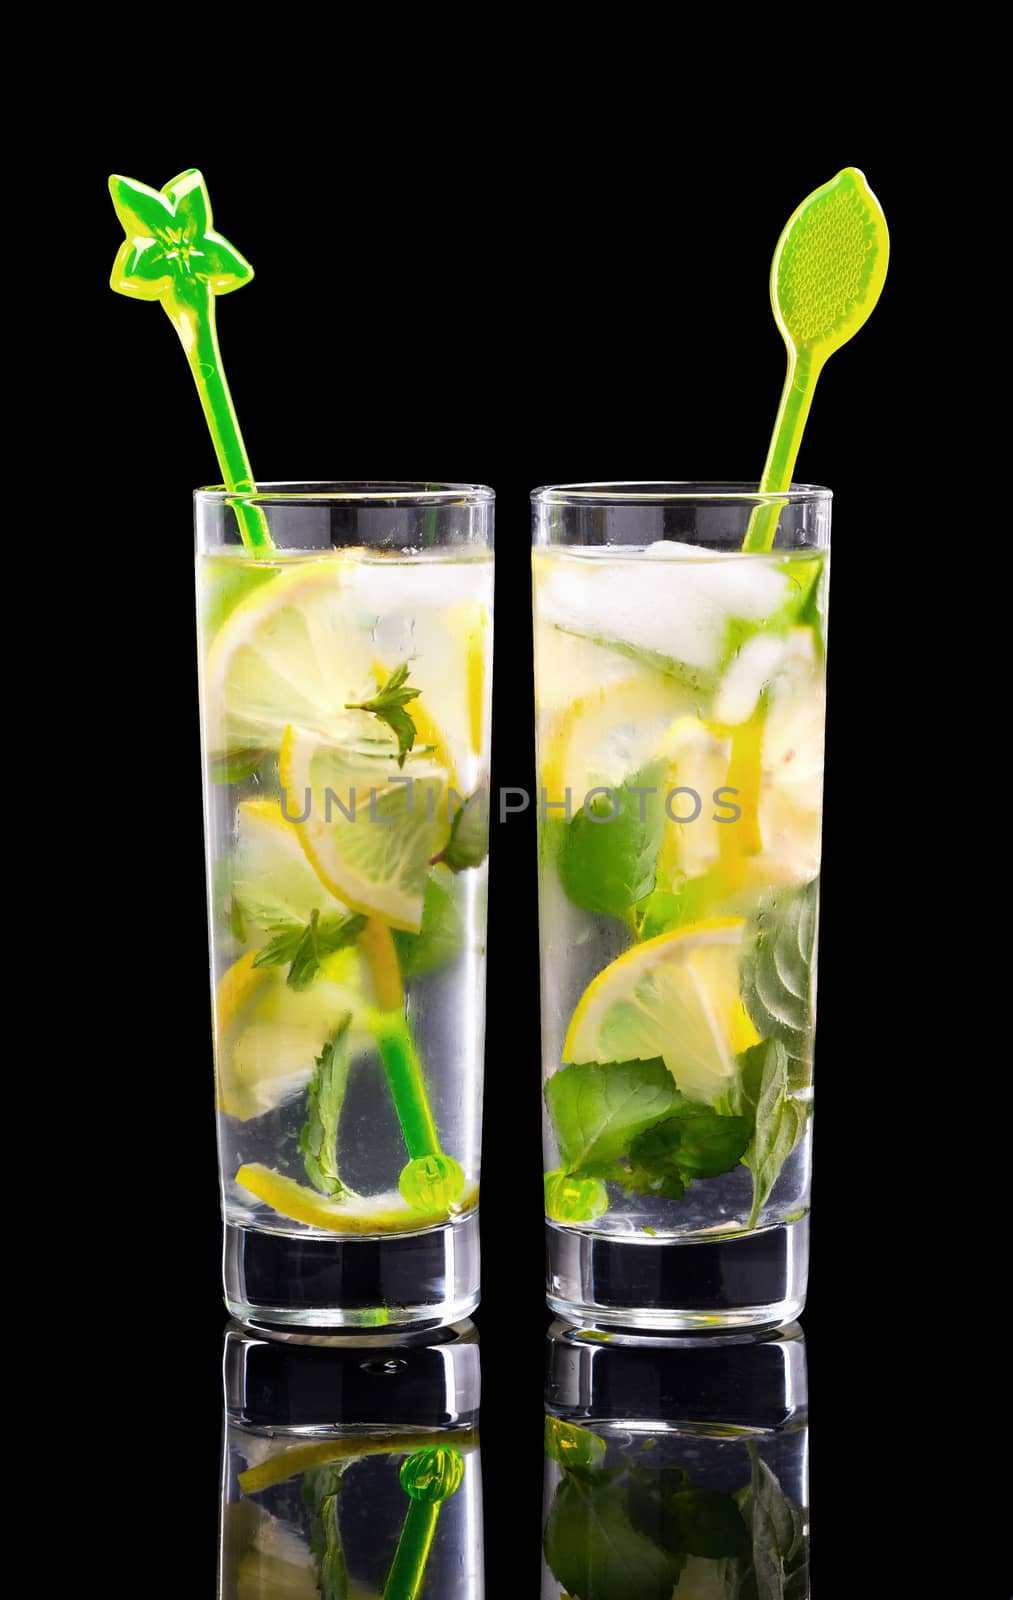 Water with lemon and mint. Cold refreshing, natural, organic, healthy drinks. Two glasses of lemonade with Cocktail Sticks. Isolated on black background